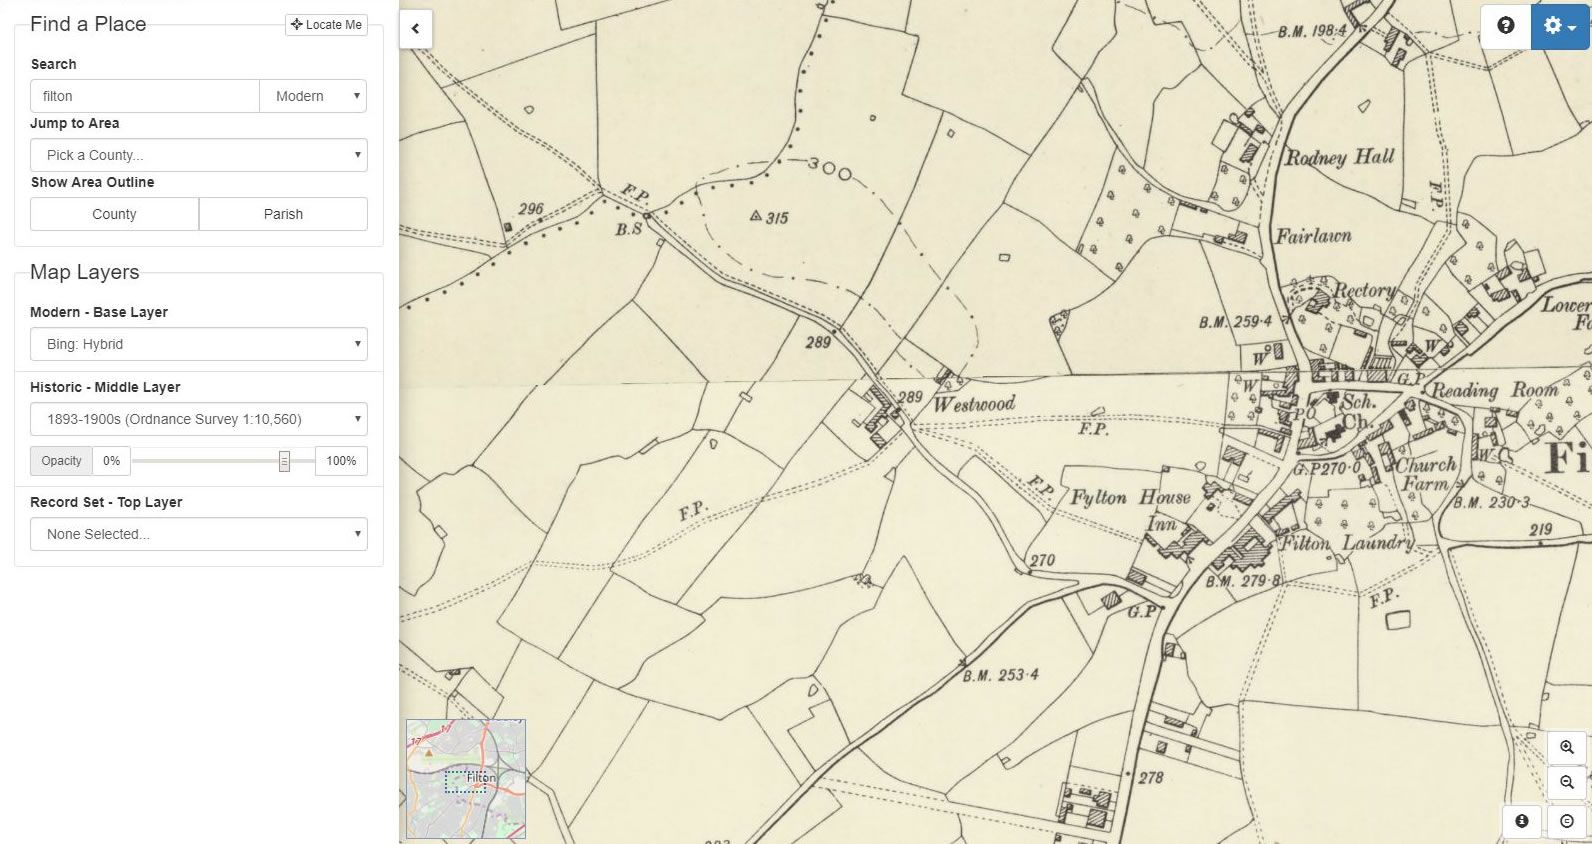 1893-1900s Map on TheGenealogist's Map Explorer™ shows the area before the British and Colonial Aeroplane Company began developing the area